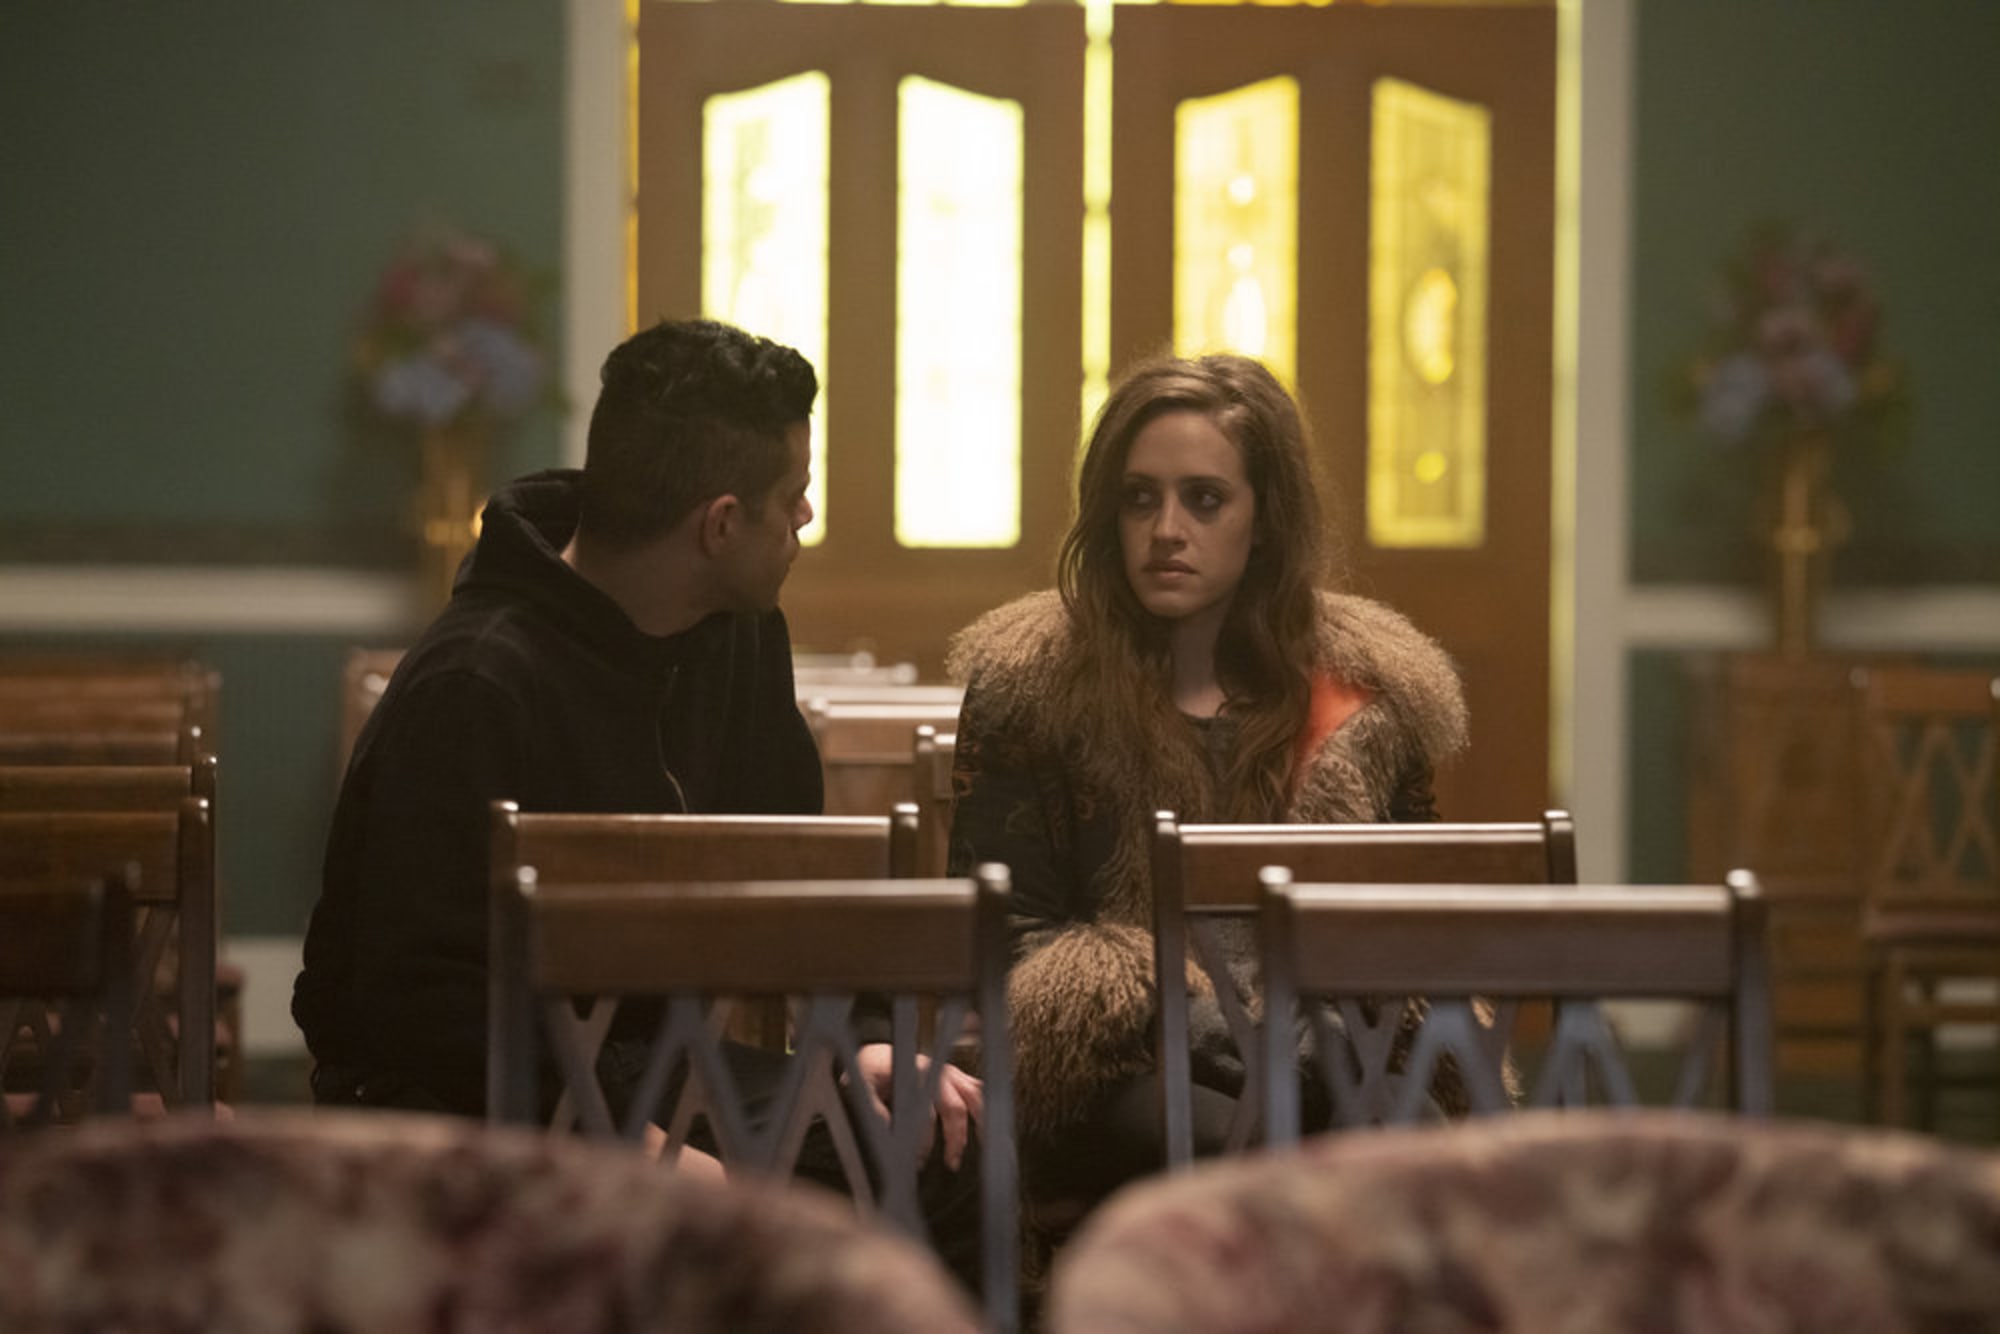 Mr. Robot' Season 4 Premiere Down After Two-Year Absence